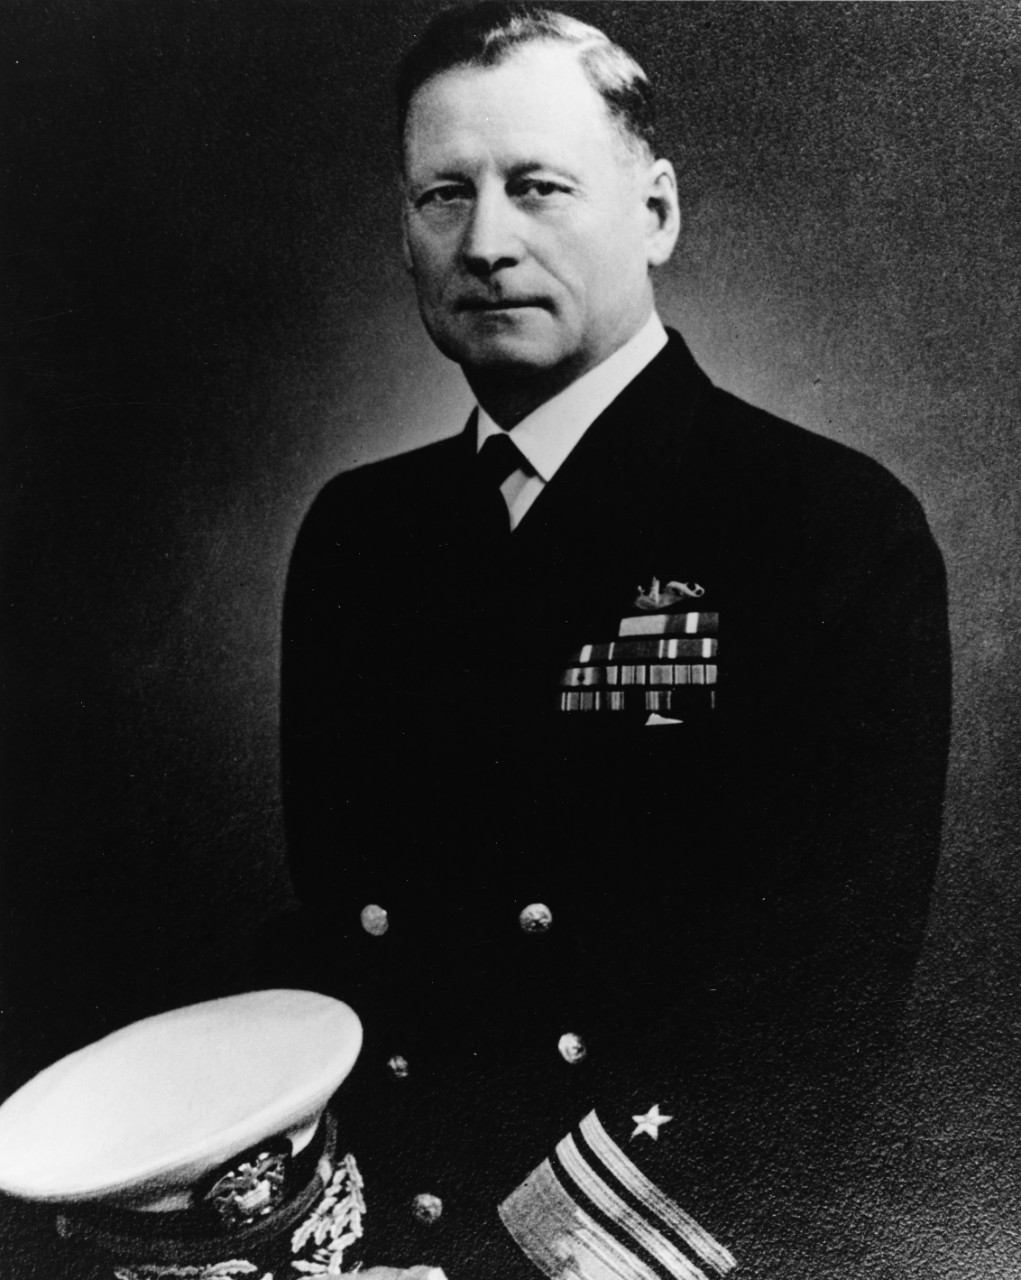 Photo #: NH 78619  Vice Admiral Paul F. Foster, USNR